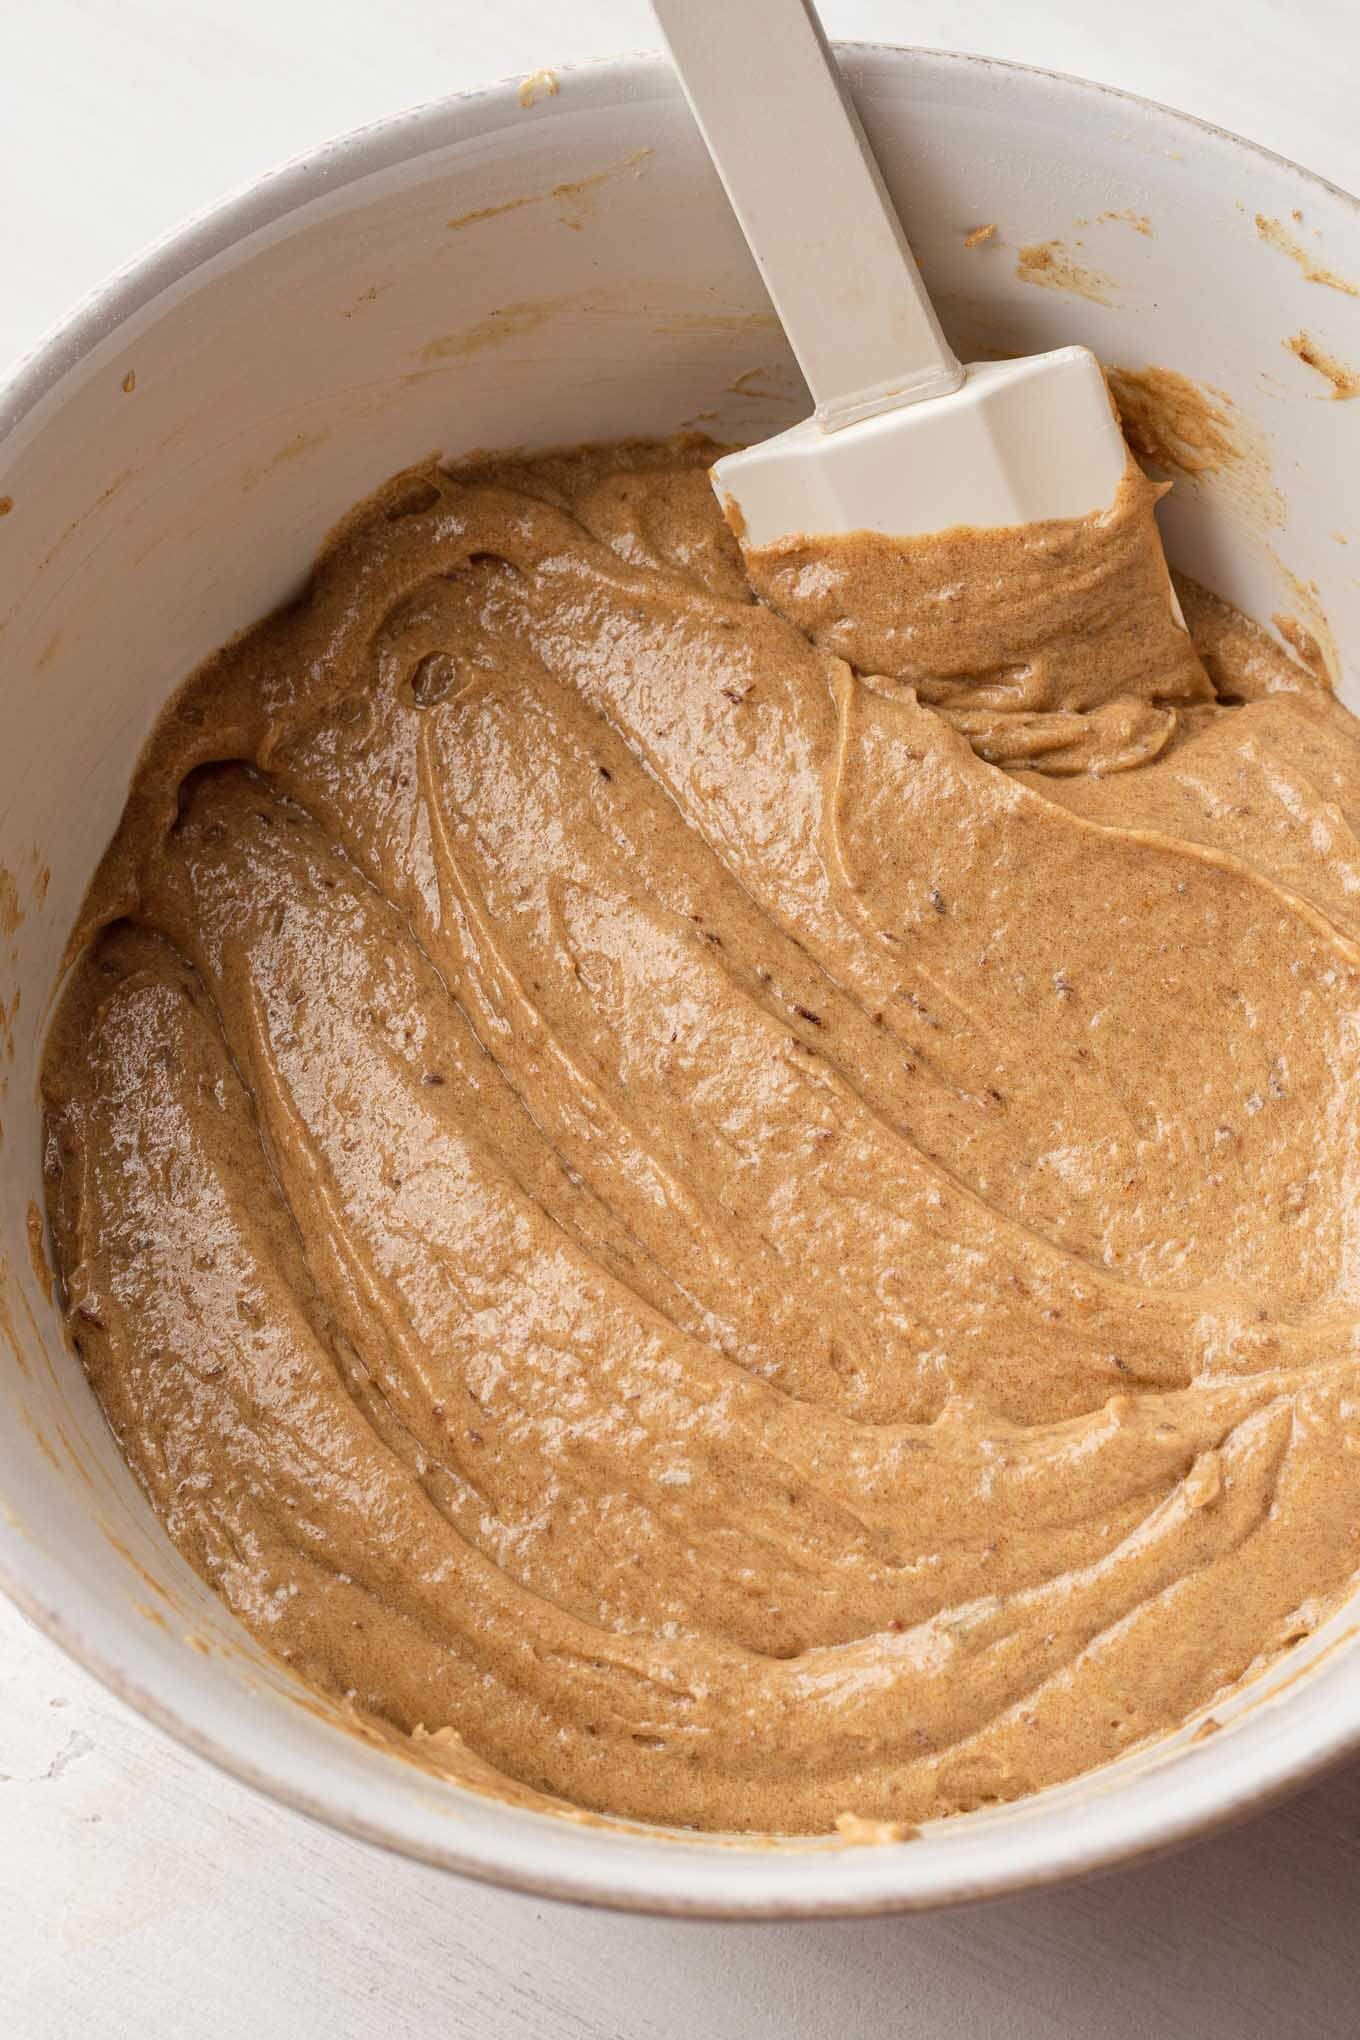 An overhead view of the cake batter fully mixed together in a white mixing bowl.